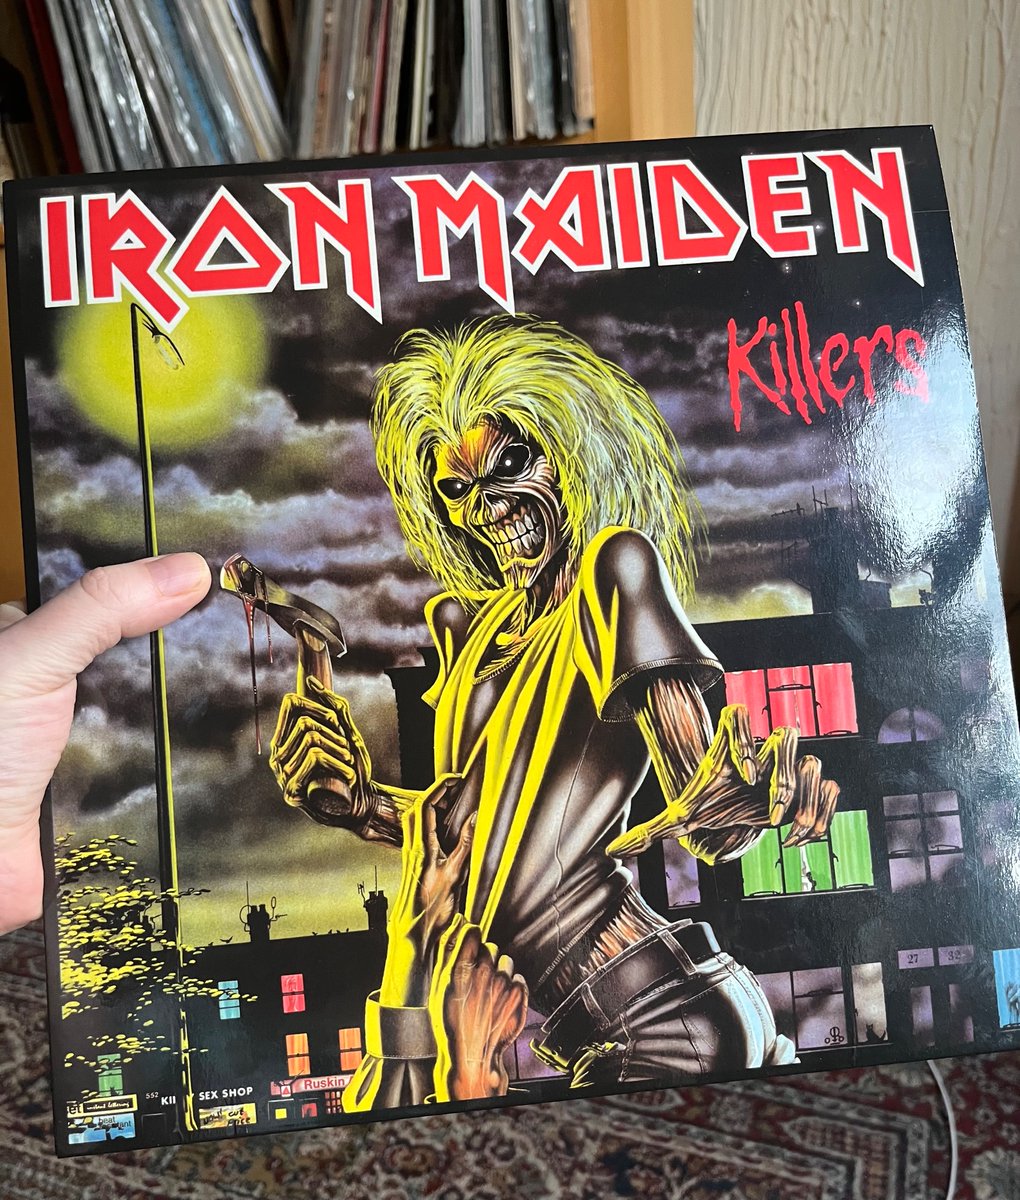 Killers is Iron Maidens greatest album , I’ll die on this hill and Paul Dianno is the GOAT of Iron Maiden vocalists too 🤘🩷
#nowplaying #HeavyMetalMania #hardrock #80smusic #albumsyoumusthear